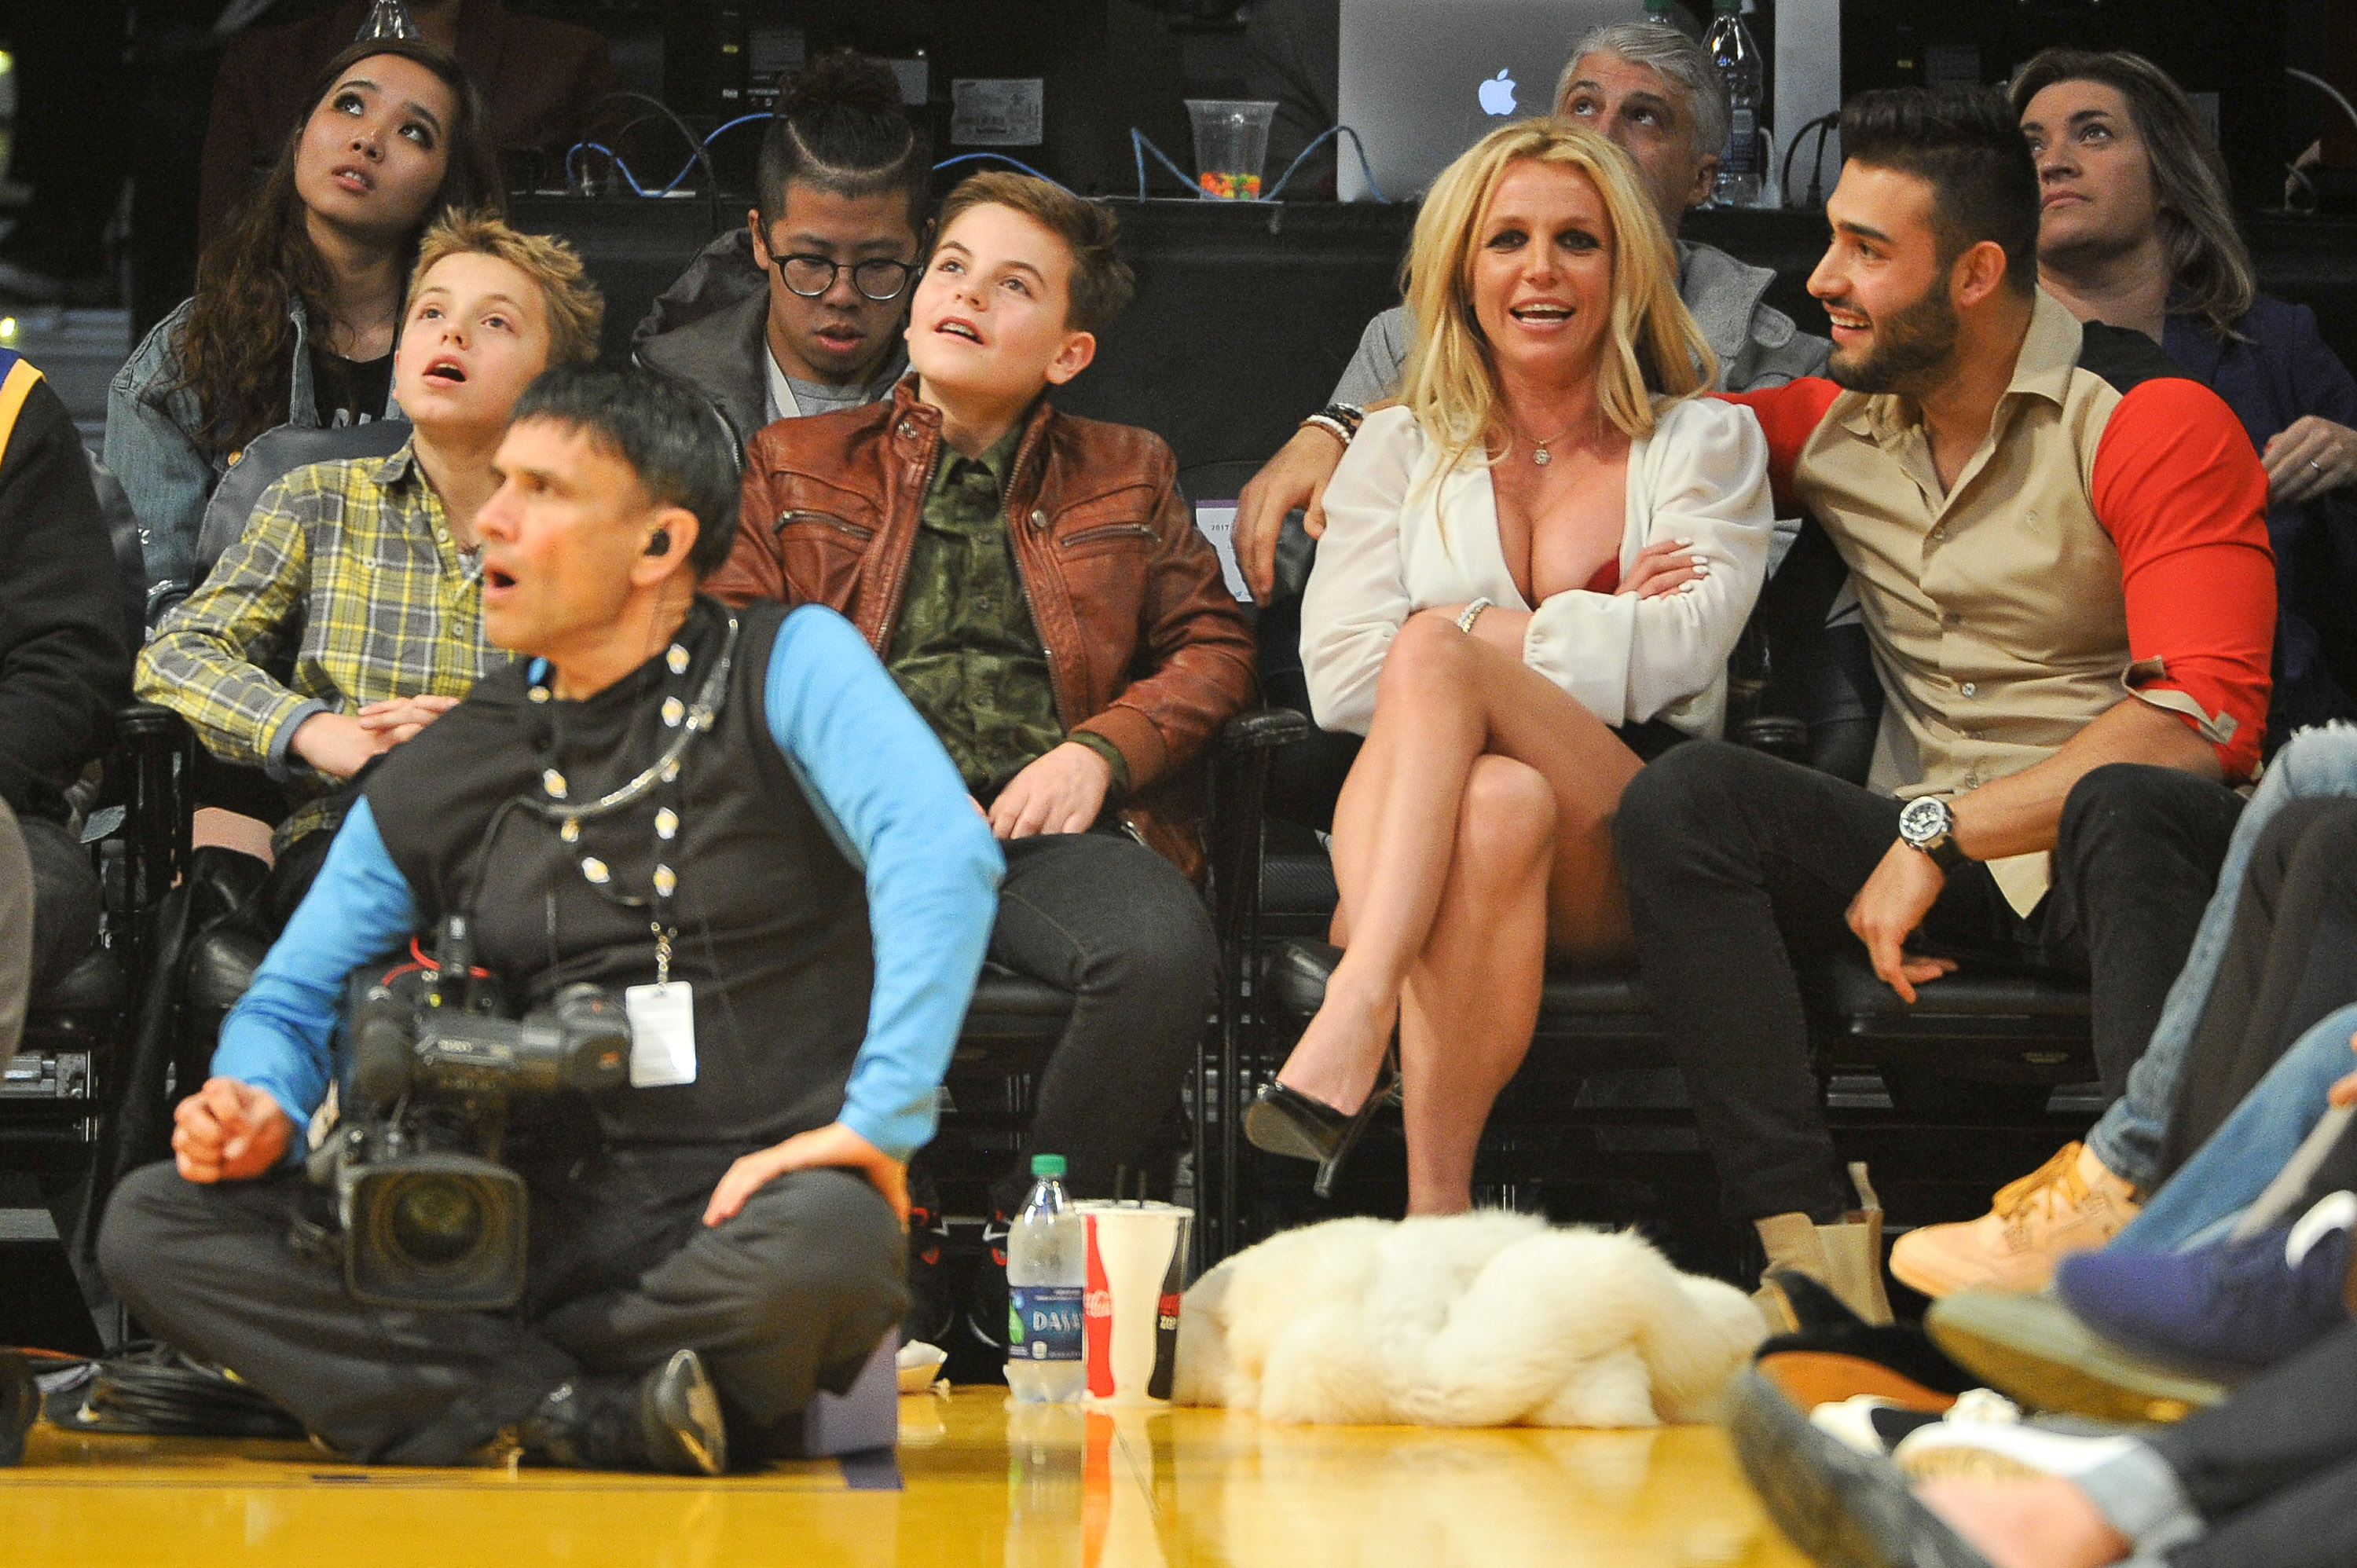 Britney Spears with her boyfriend Sam Asghari and her sons, Sean Preston Federline and Jayden James Federline, at a Los Angeles Lakers basketball game together